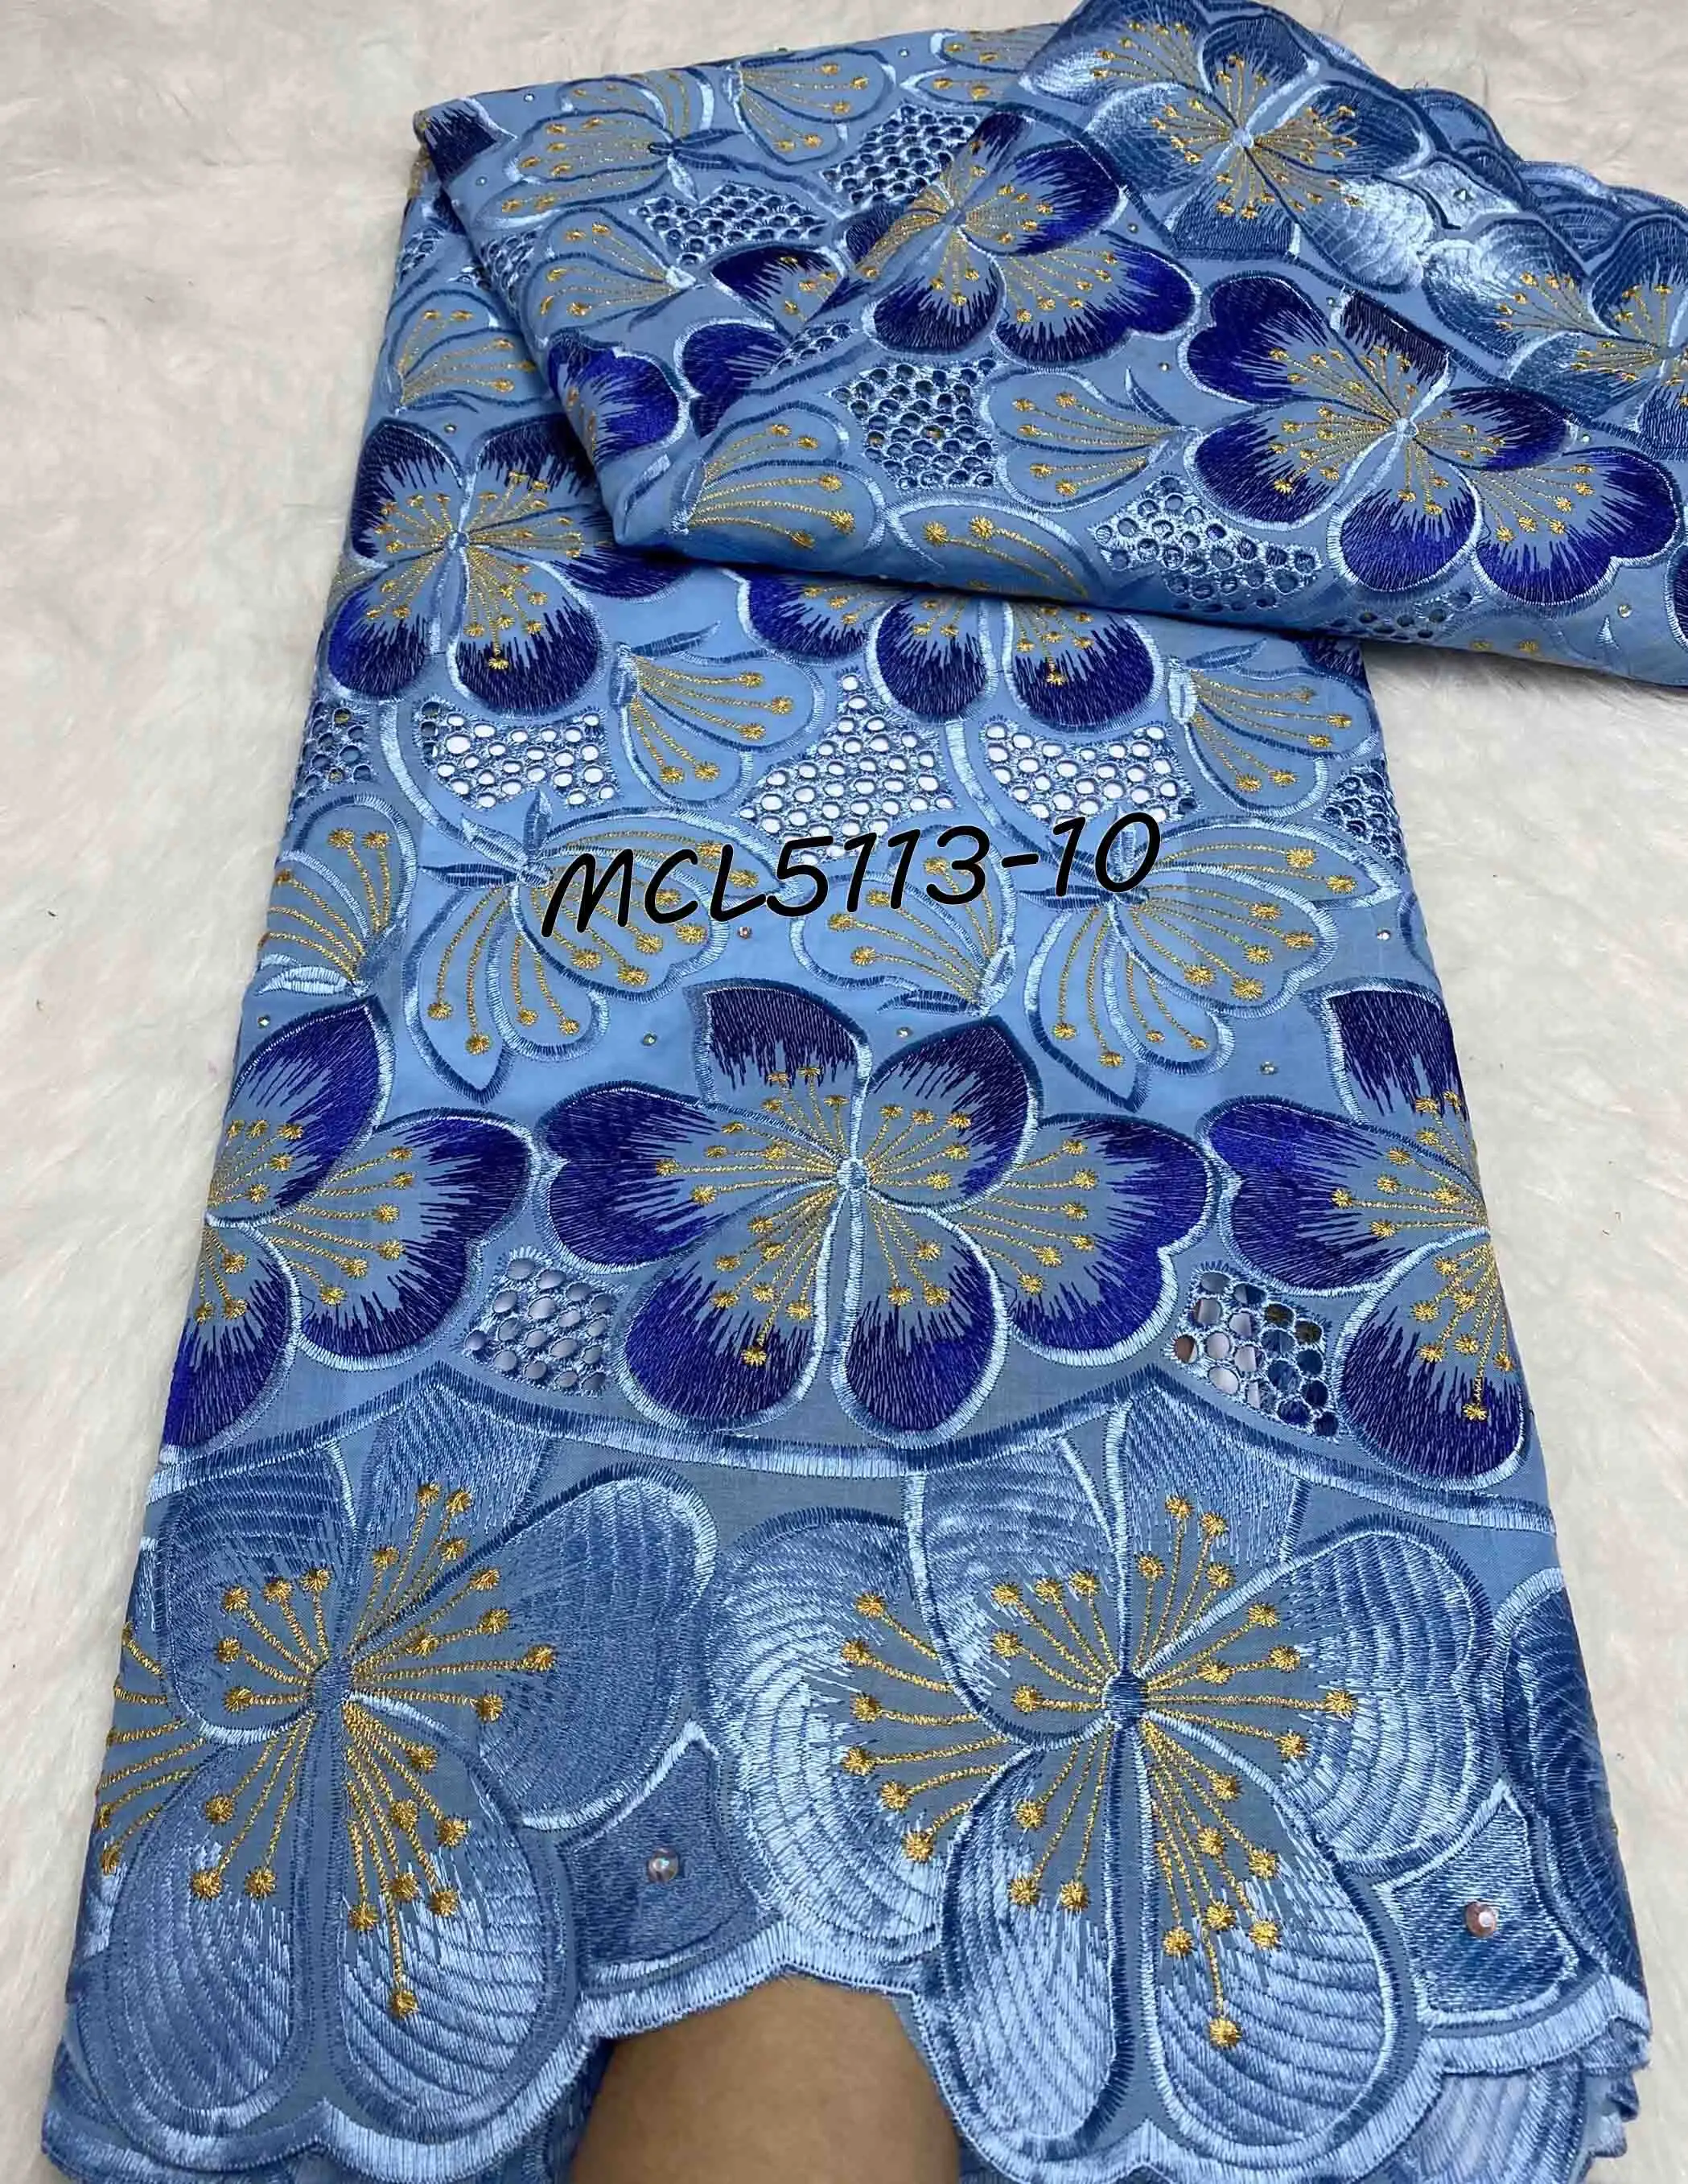 Mikemaycall 2023 Latest Design 100% Cotton Swiss Voile Lace Fabric Cheap African Swiss Cotton Lace Suitable For Party Wedding